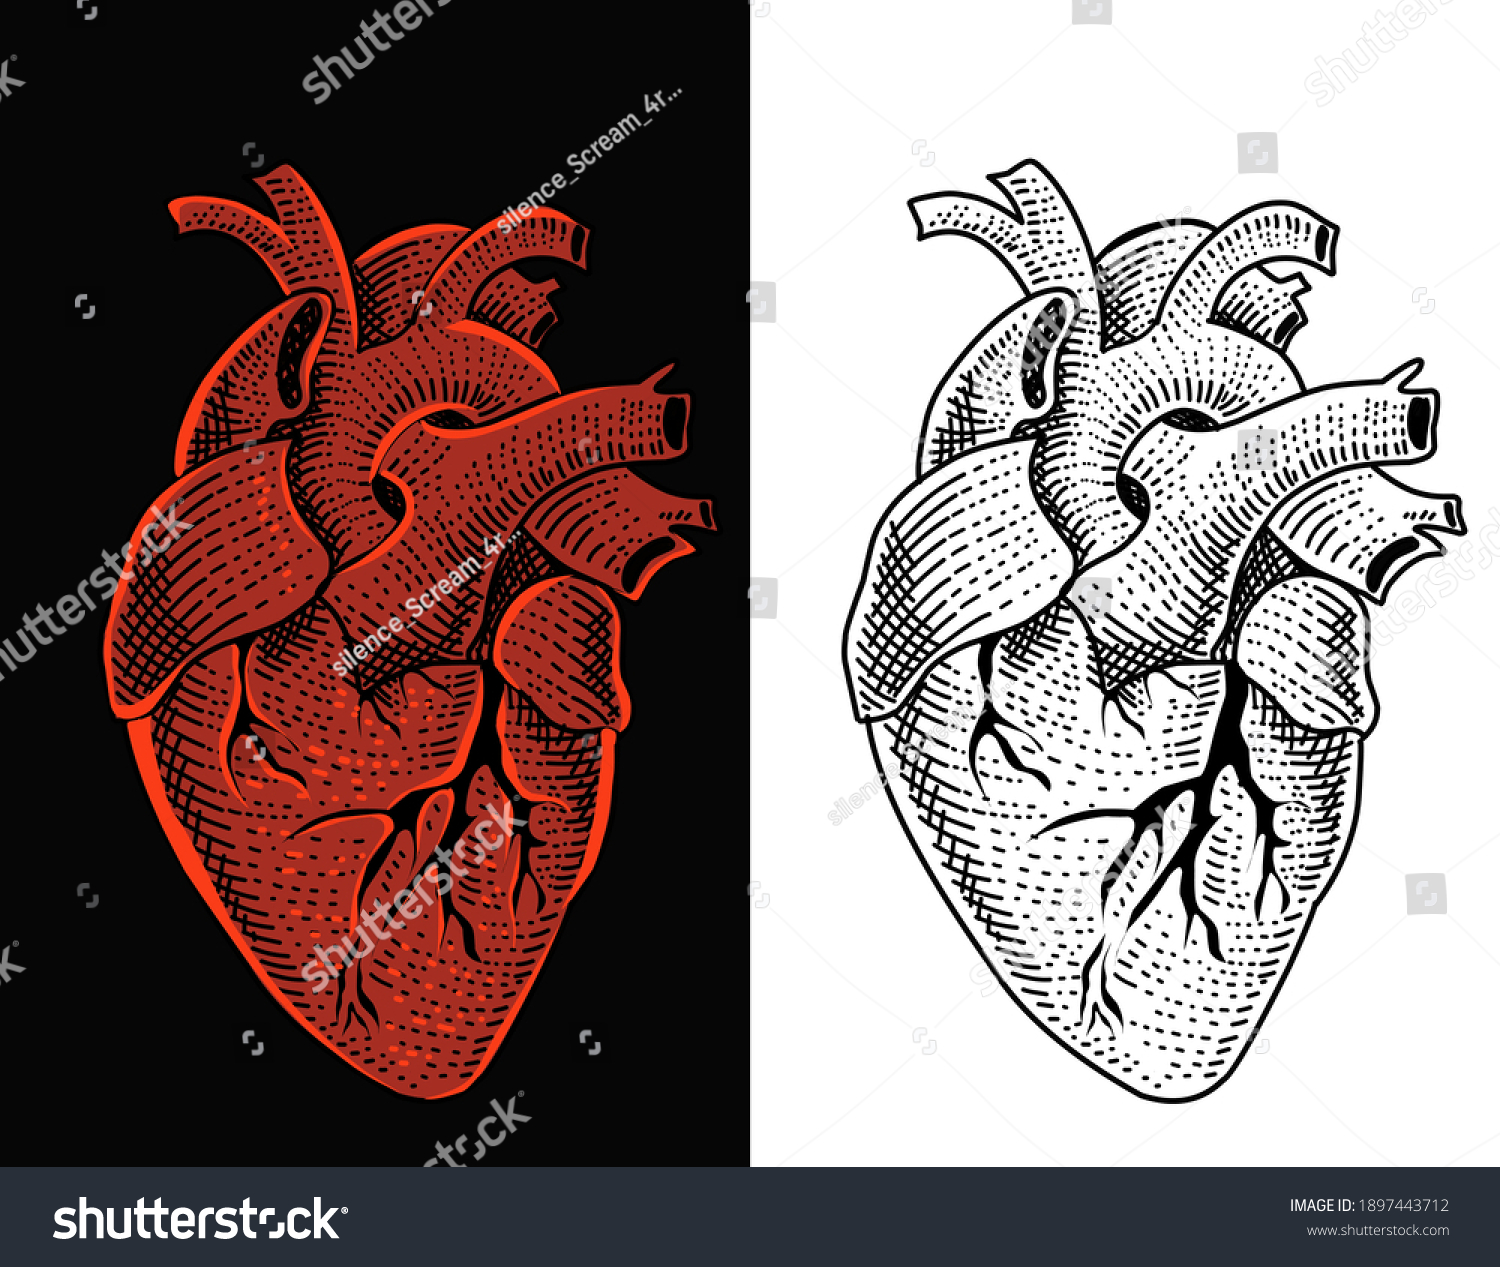 Illustration Vector Human Heart Engraving Style Stock Vector Royalty Free